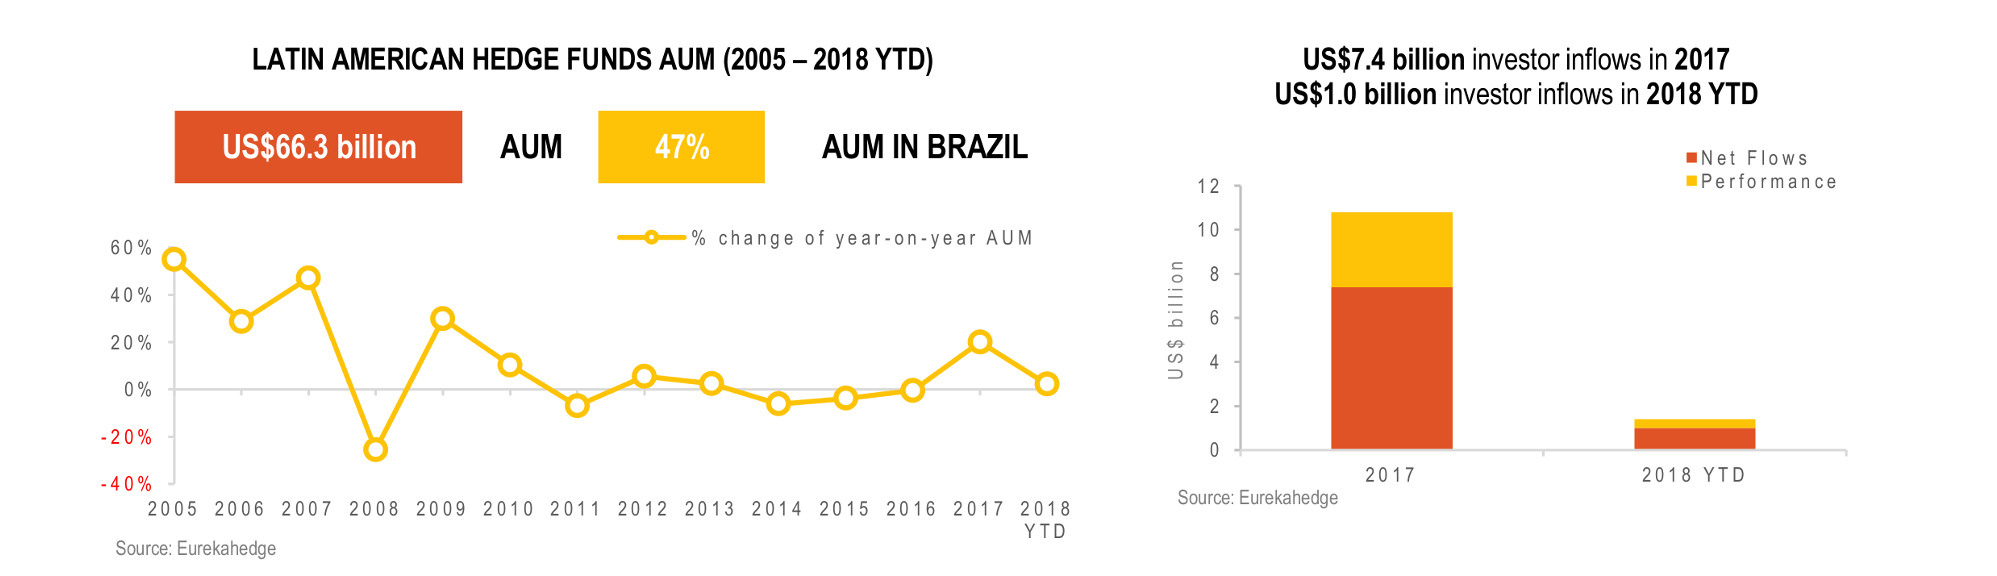 Latin American Hedge Funds Infographic May 2018 - AUM